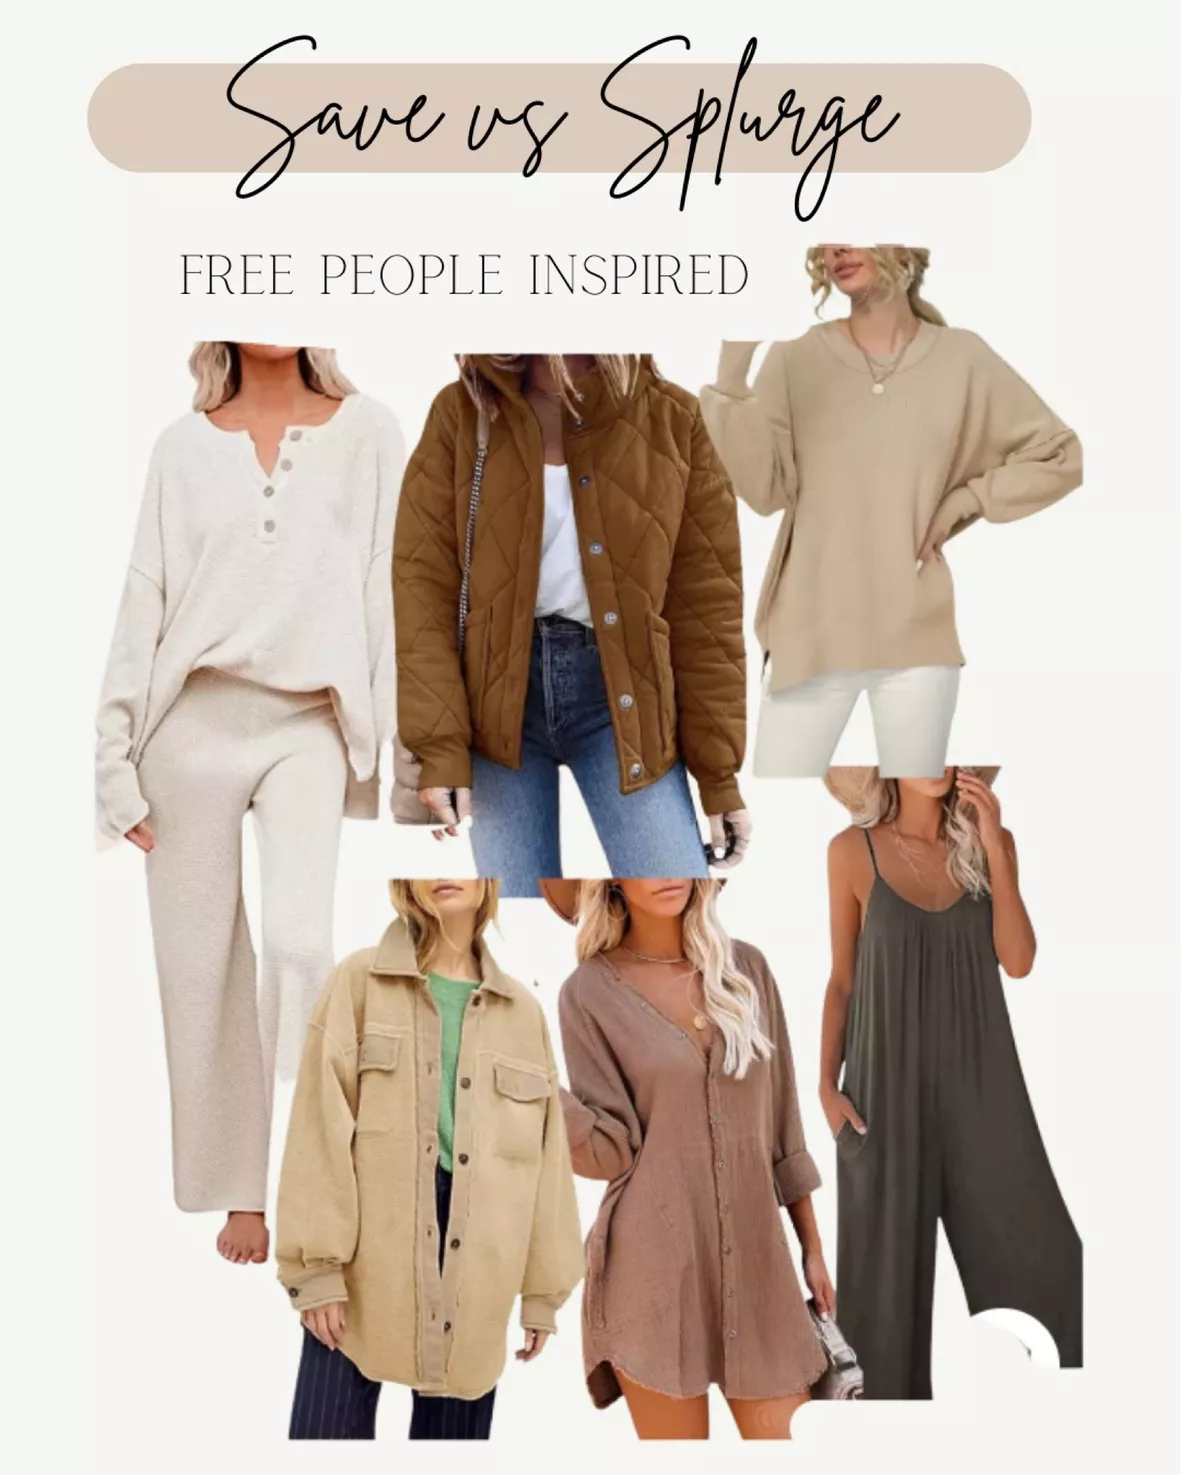 Fall Is Coming And You Need a Light, Transitional Shacket for All